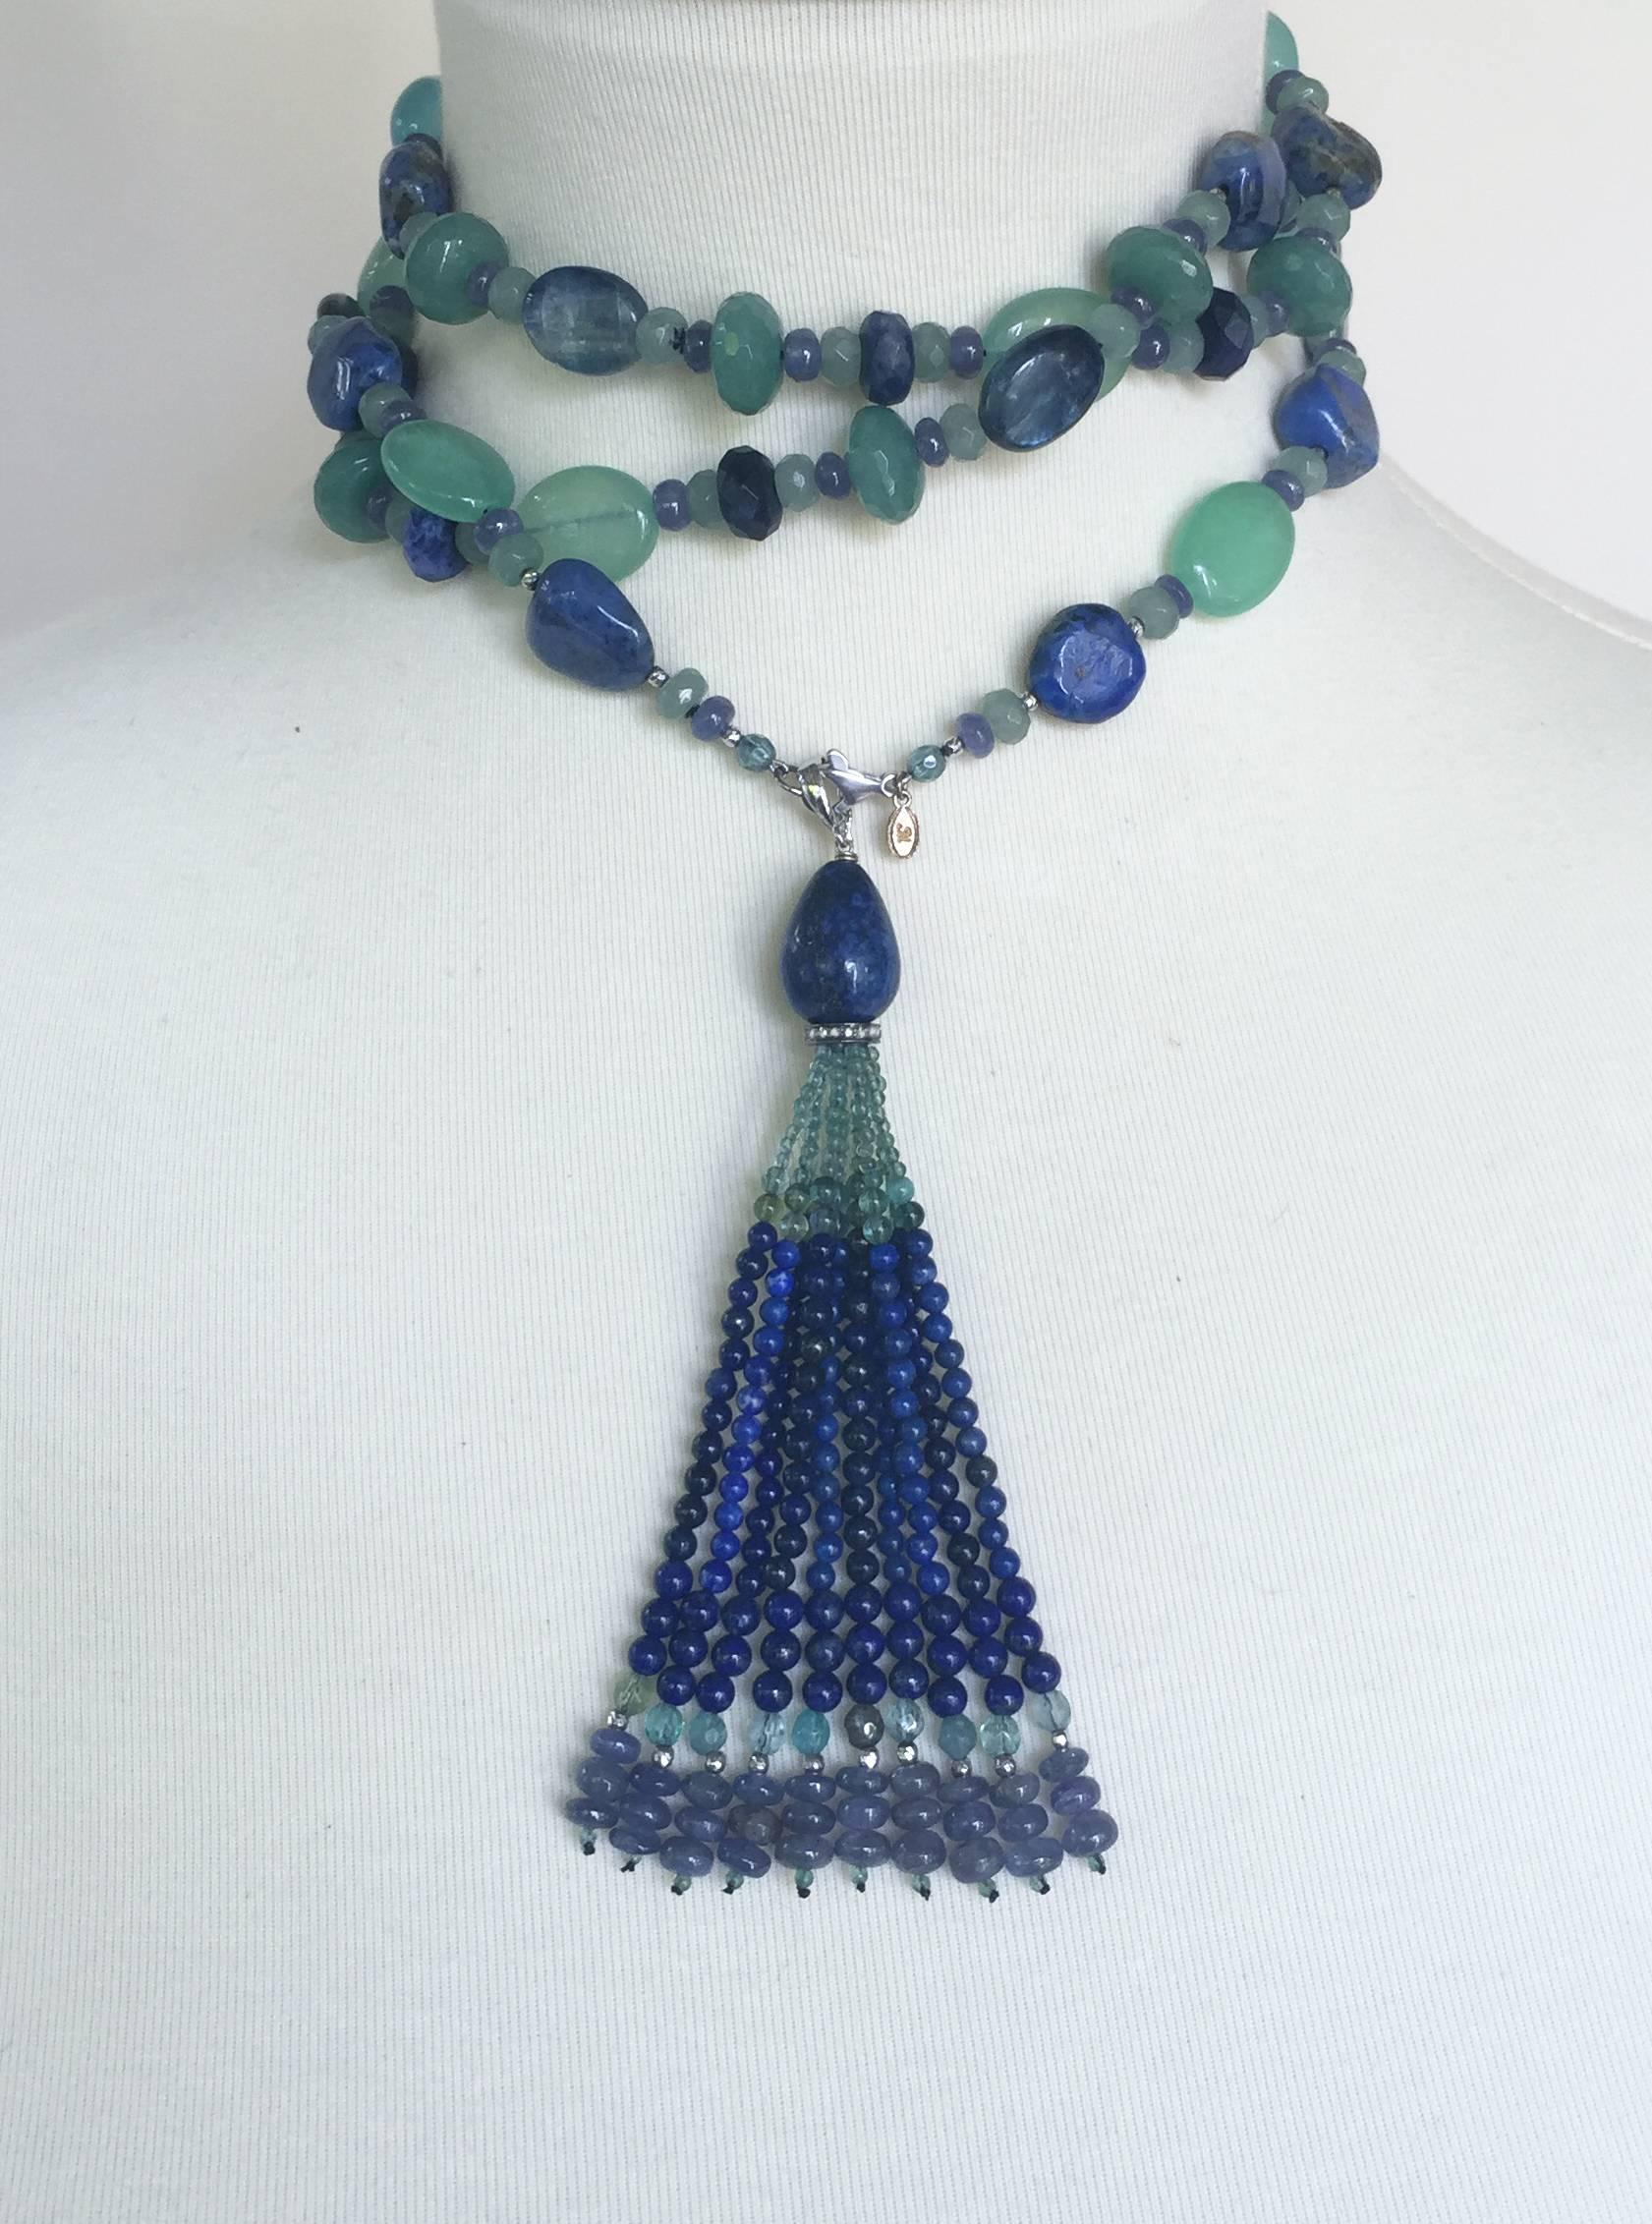 The dynamic blue and green colors come from the different shades and cut of Lapis Lazuli, Sapphire, Tanzaninte, Blue Apatite, Agate, Kyanite, Aventurine, and  Laboradite stones, highlighted by 14k white gold beads and findings. The tassel (4.5